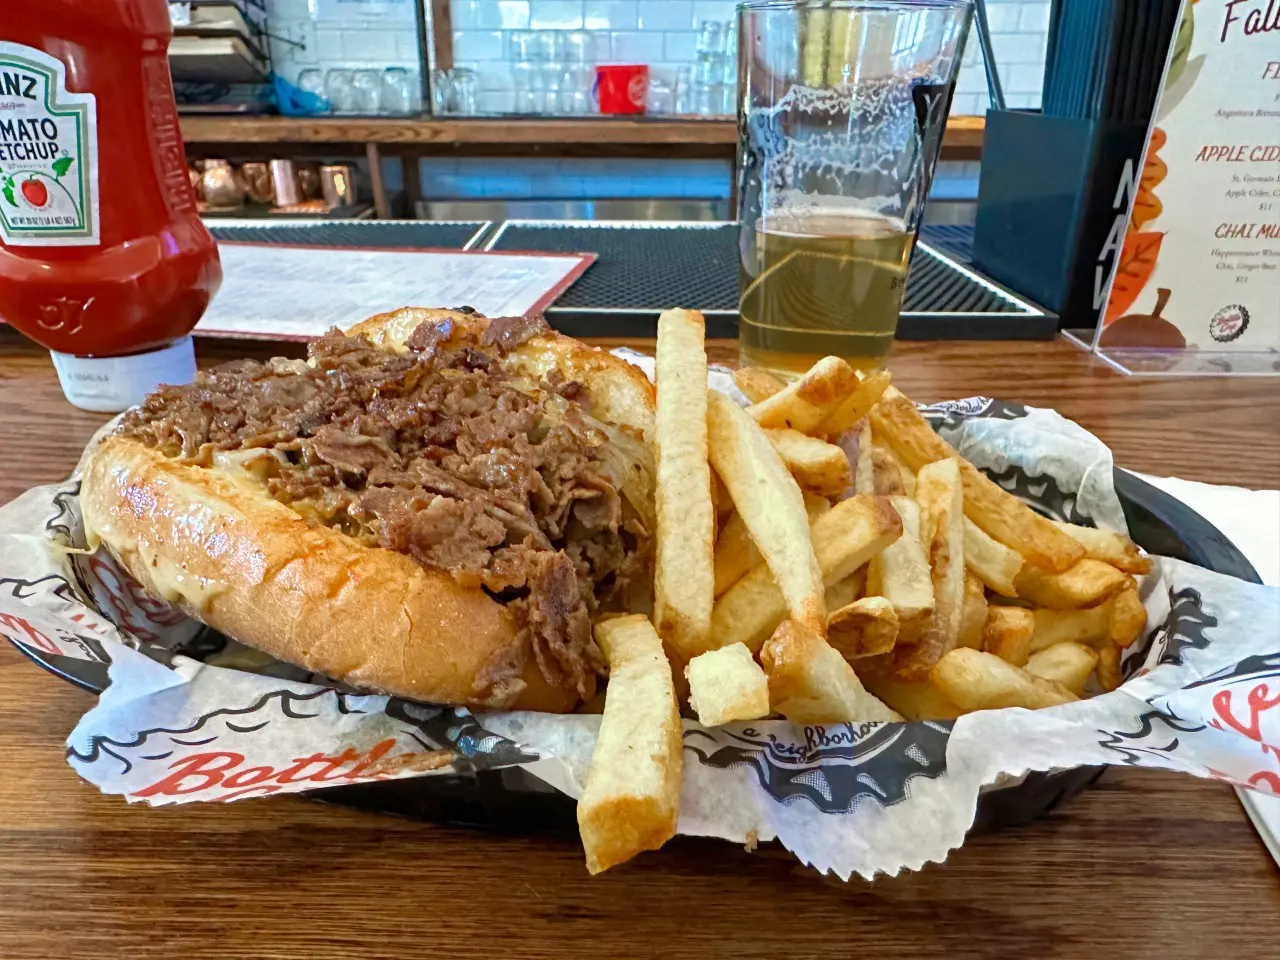 Photo of a philly steak and fries